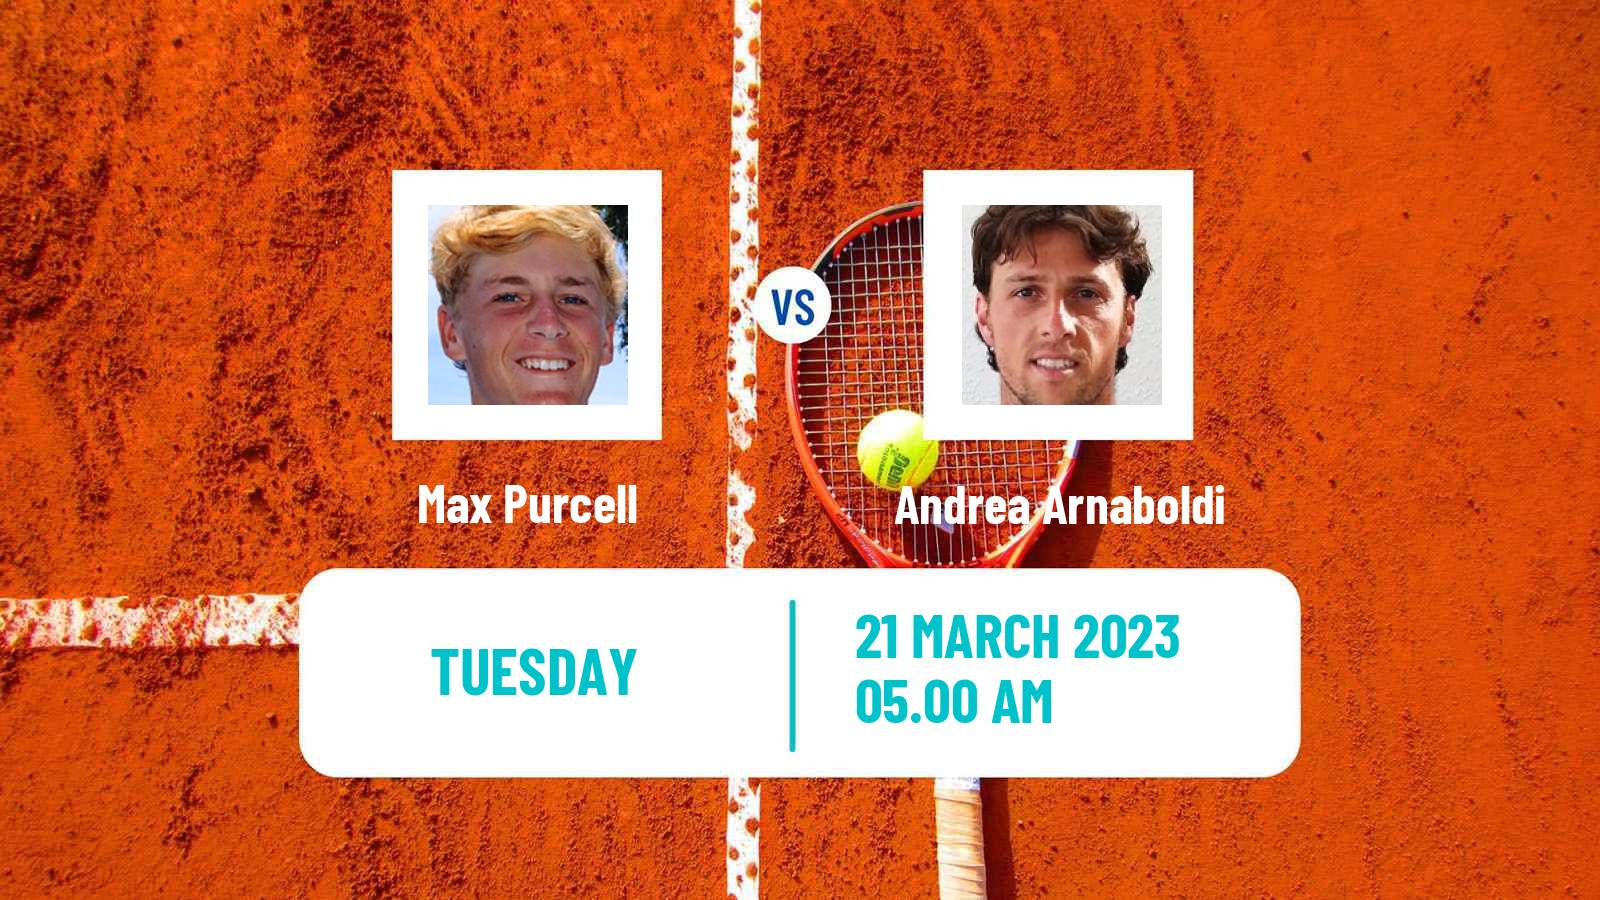 Tennis ATP Challenger Max Purcell - Andrea Arnaboldi